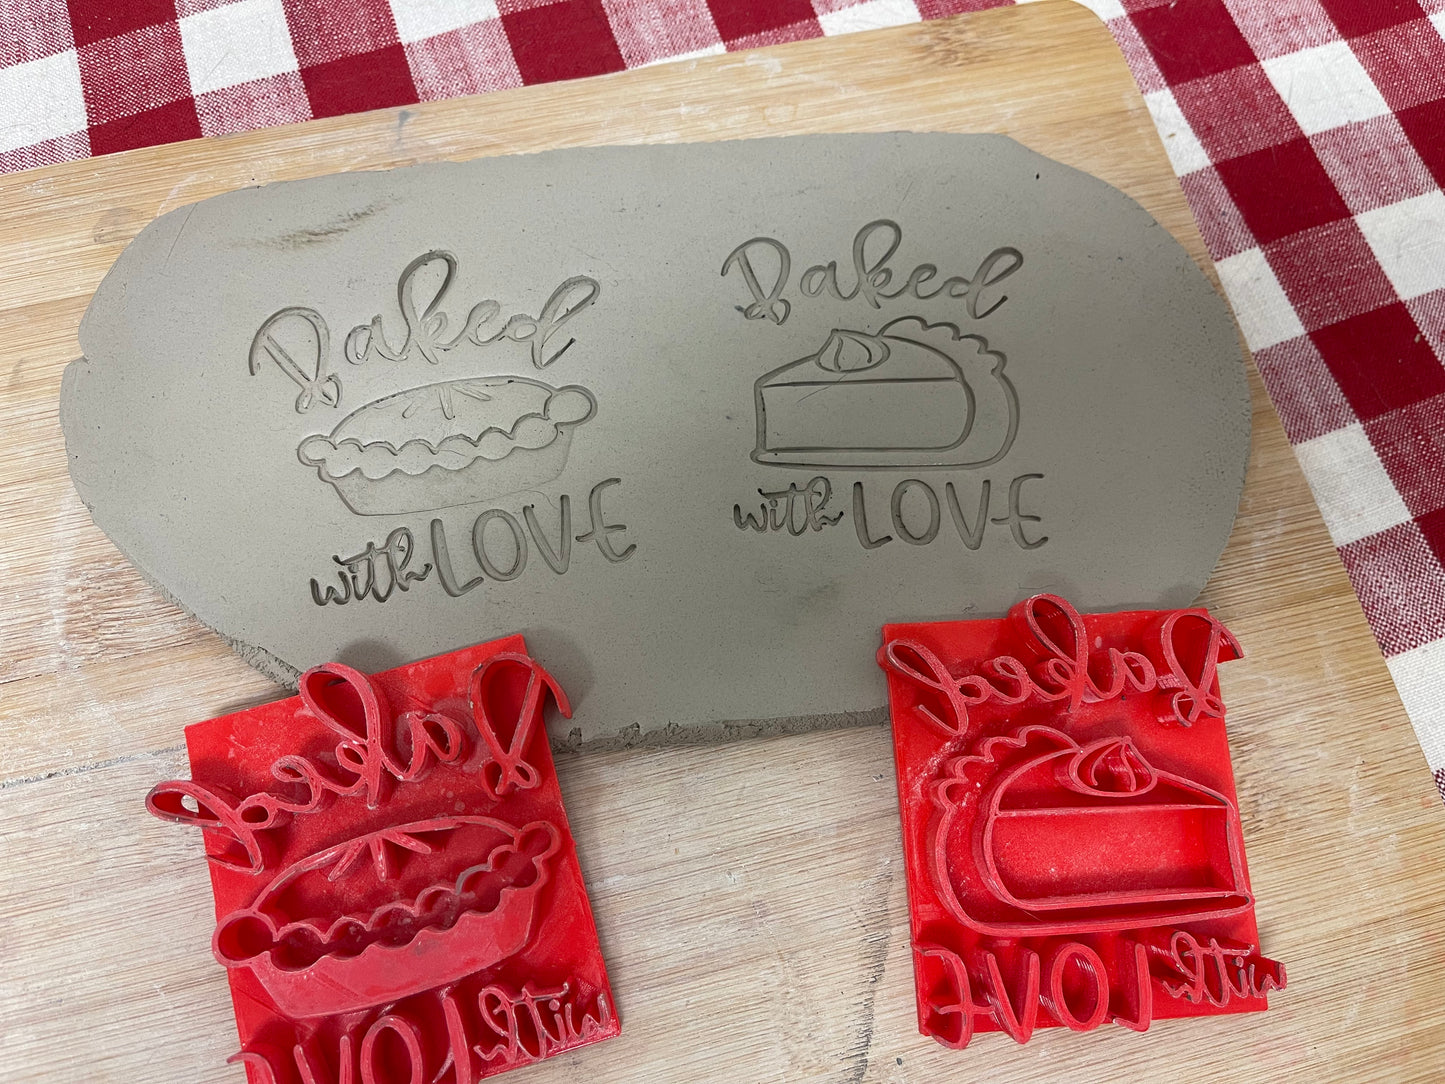 "Baked with Love" (Pie) word stamp - plastic 3D printed, multiple sizes, sold as set or each